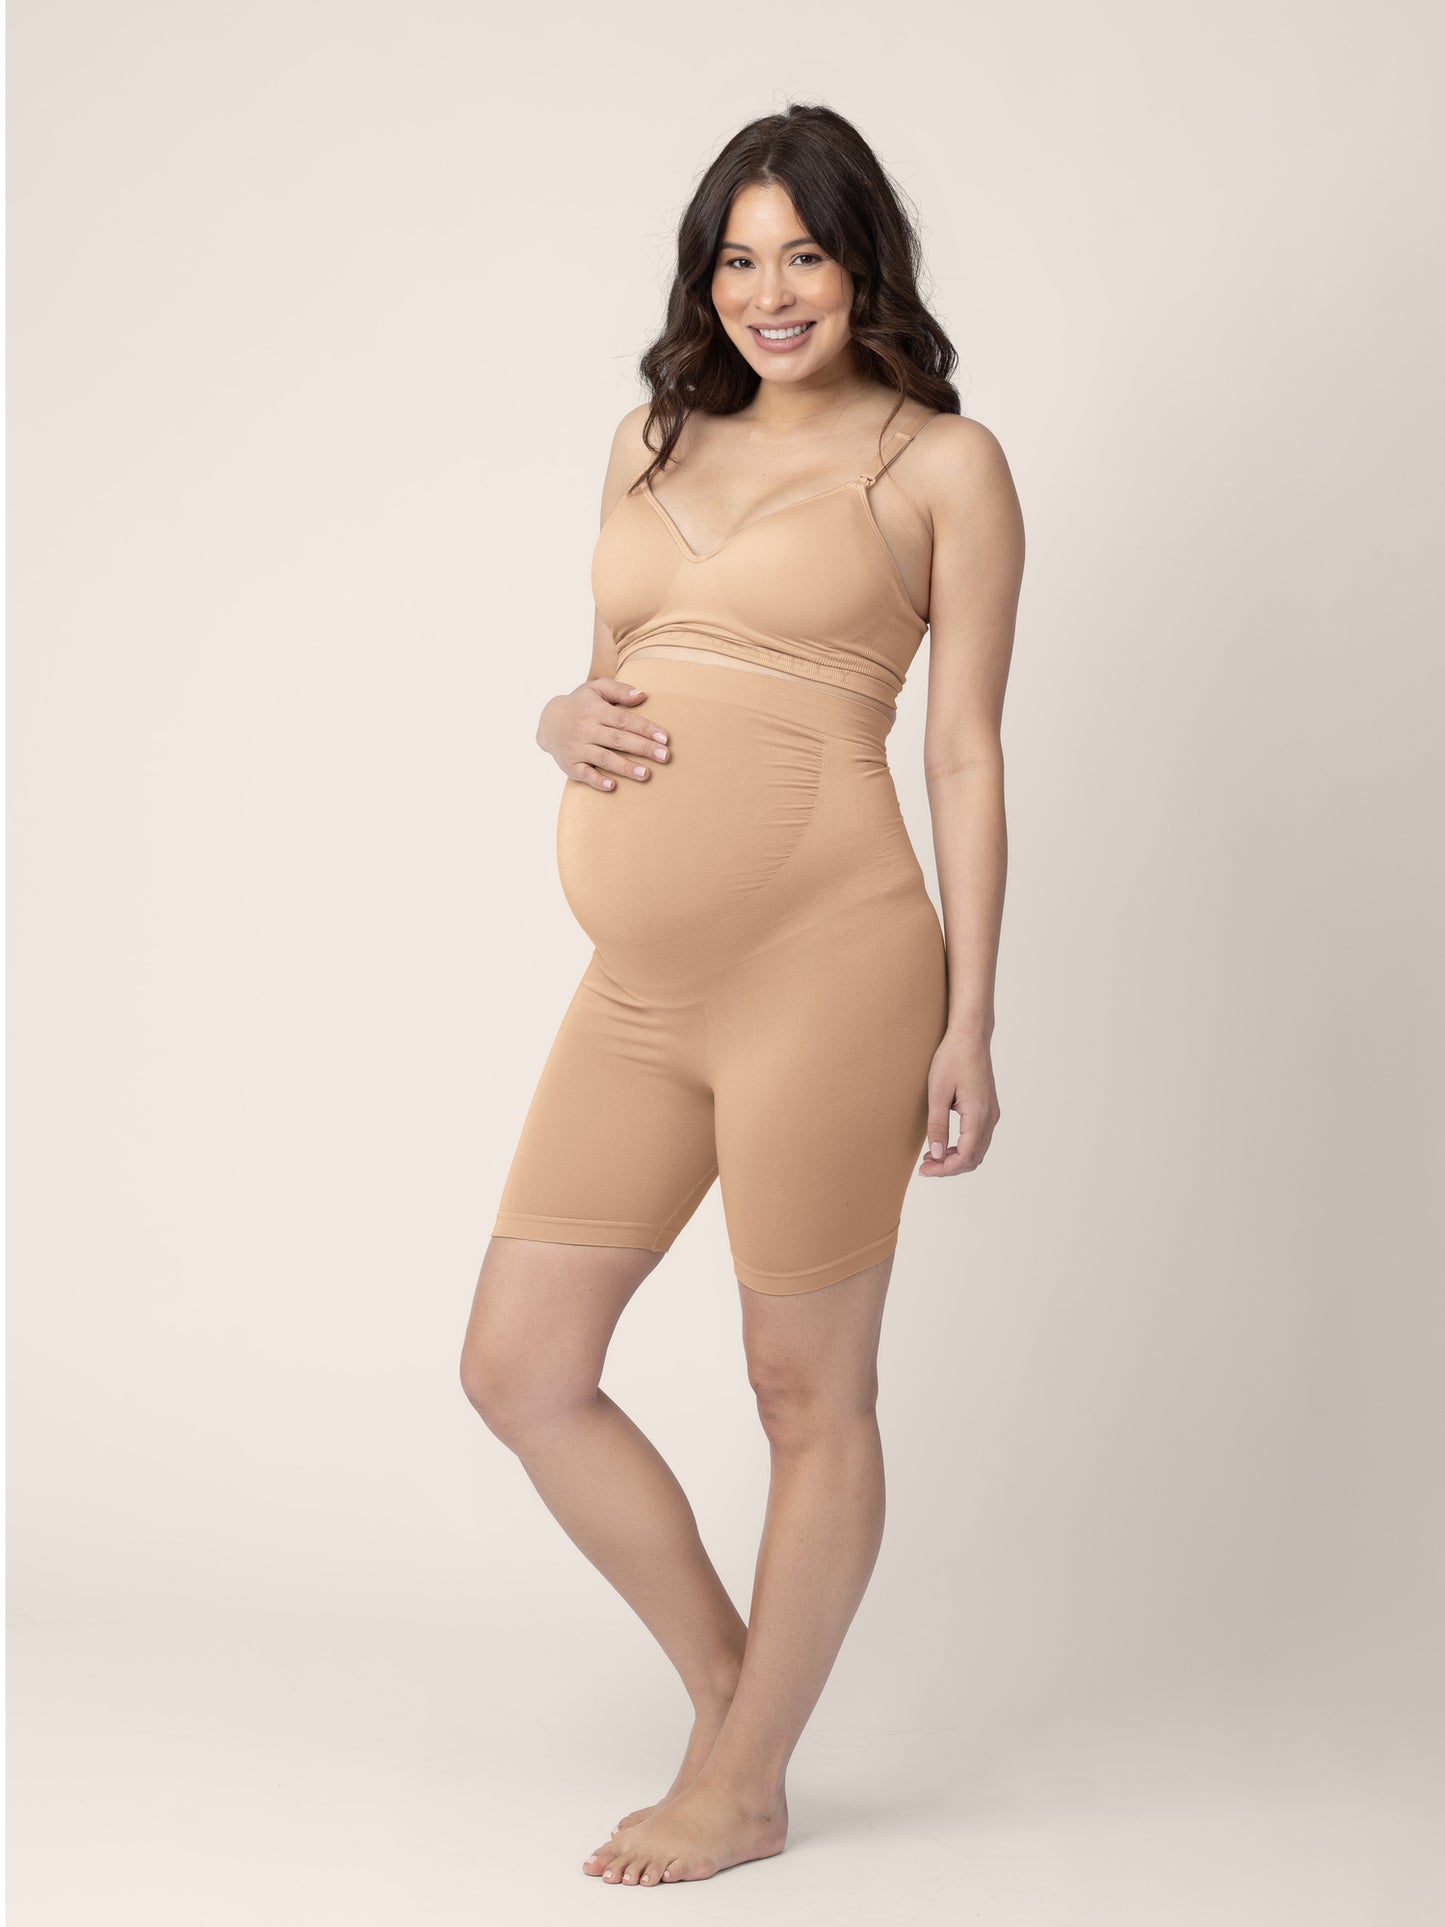 Pregnant model wearing the Seamless Bamboo Maternity Thigh Savers in Beige with her hand on her stomach.@model_info:Vanessa is wearing a Small.